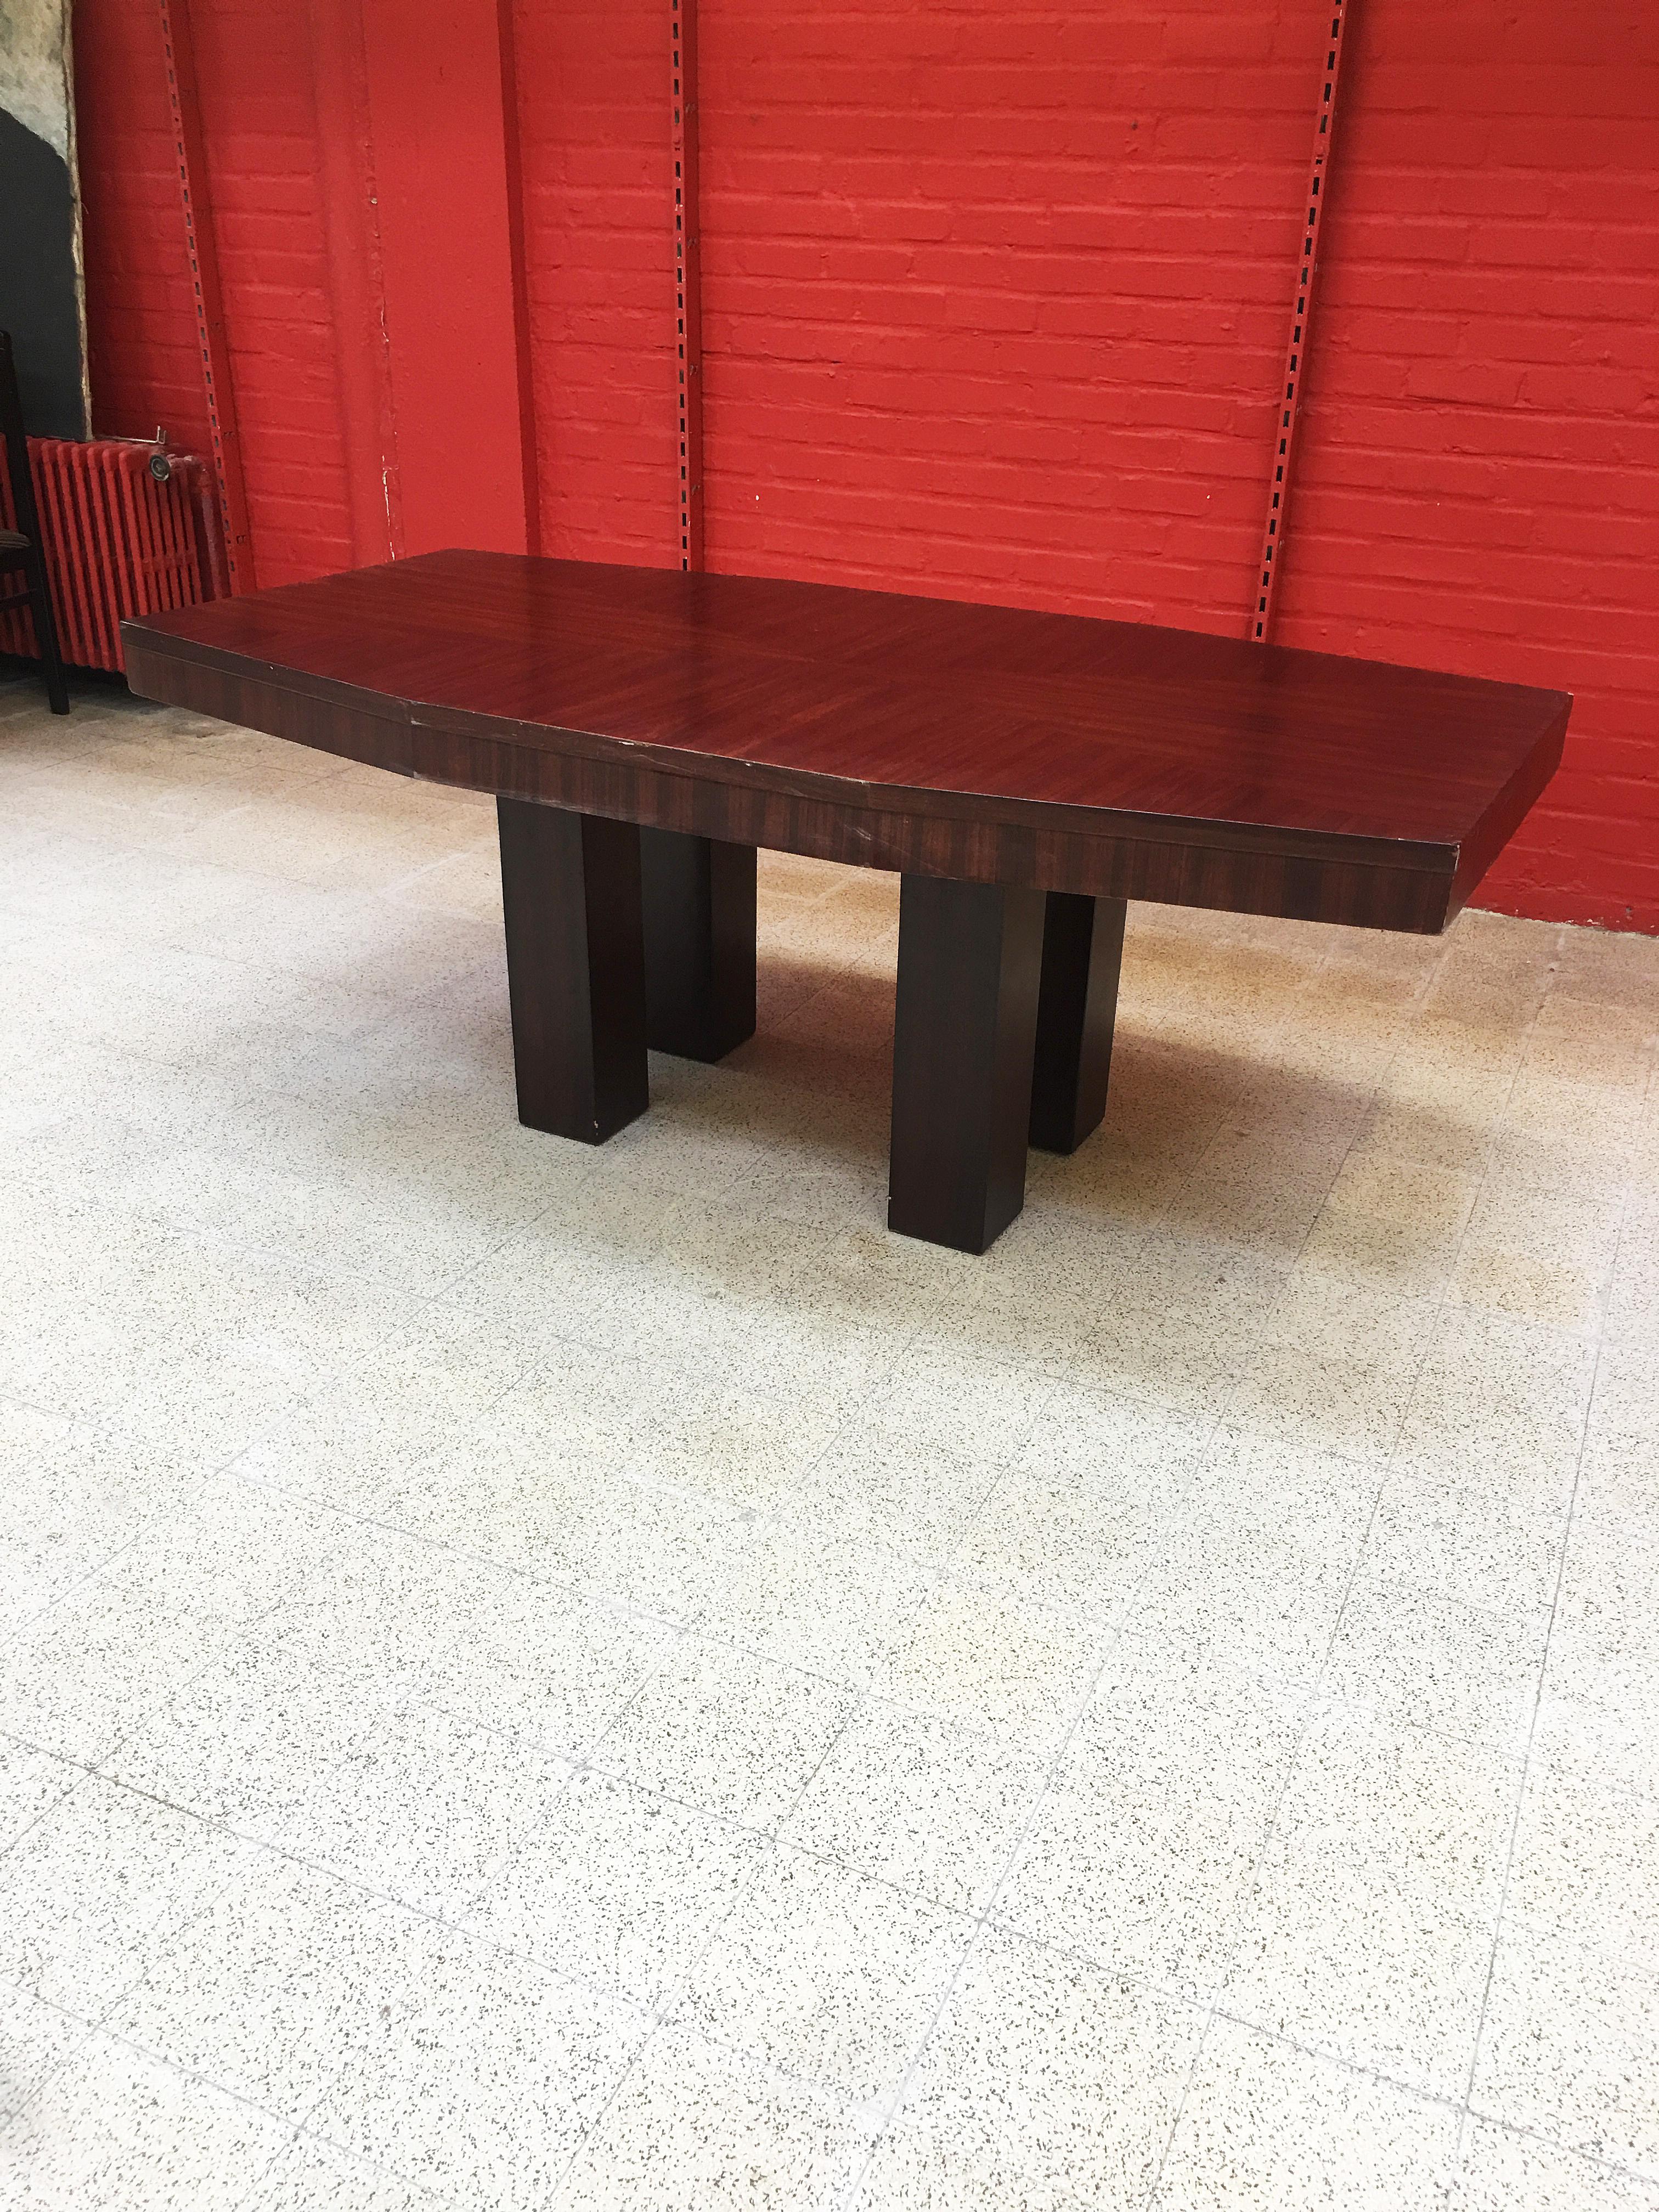 Walnut Modernist Art Deco Table circa 1930-1940 Attributed to Jacques Adnet For Sale